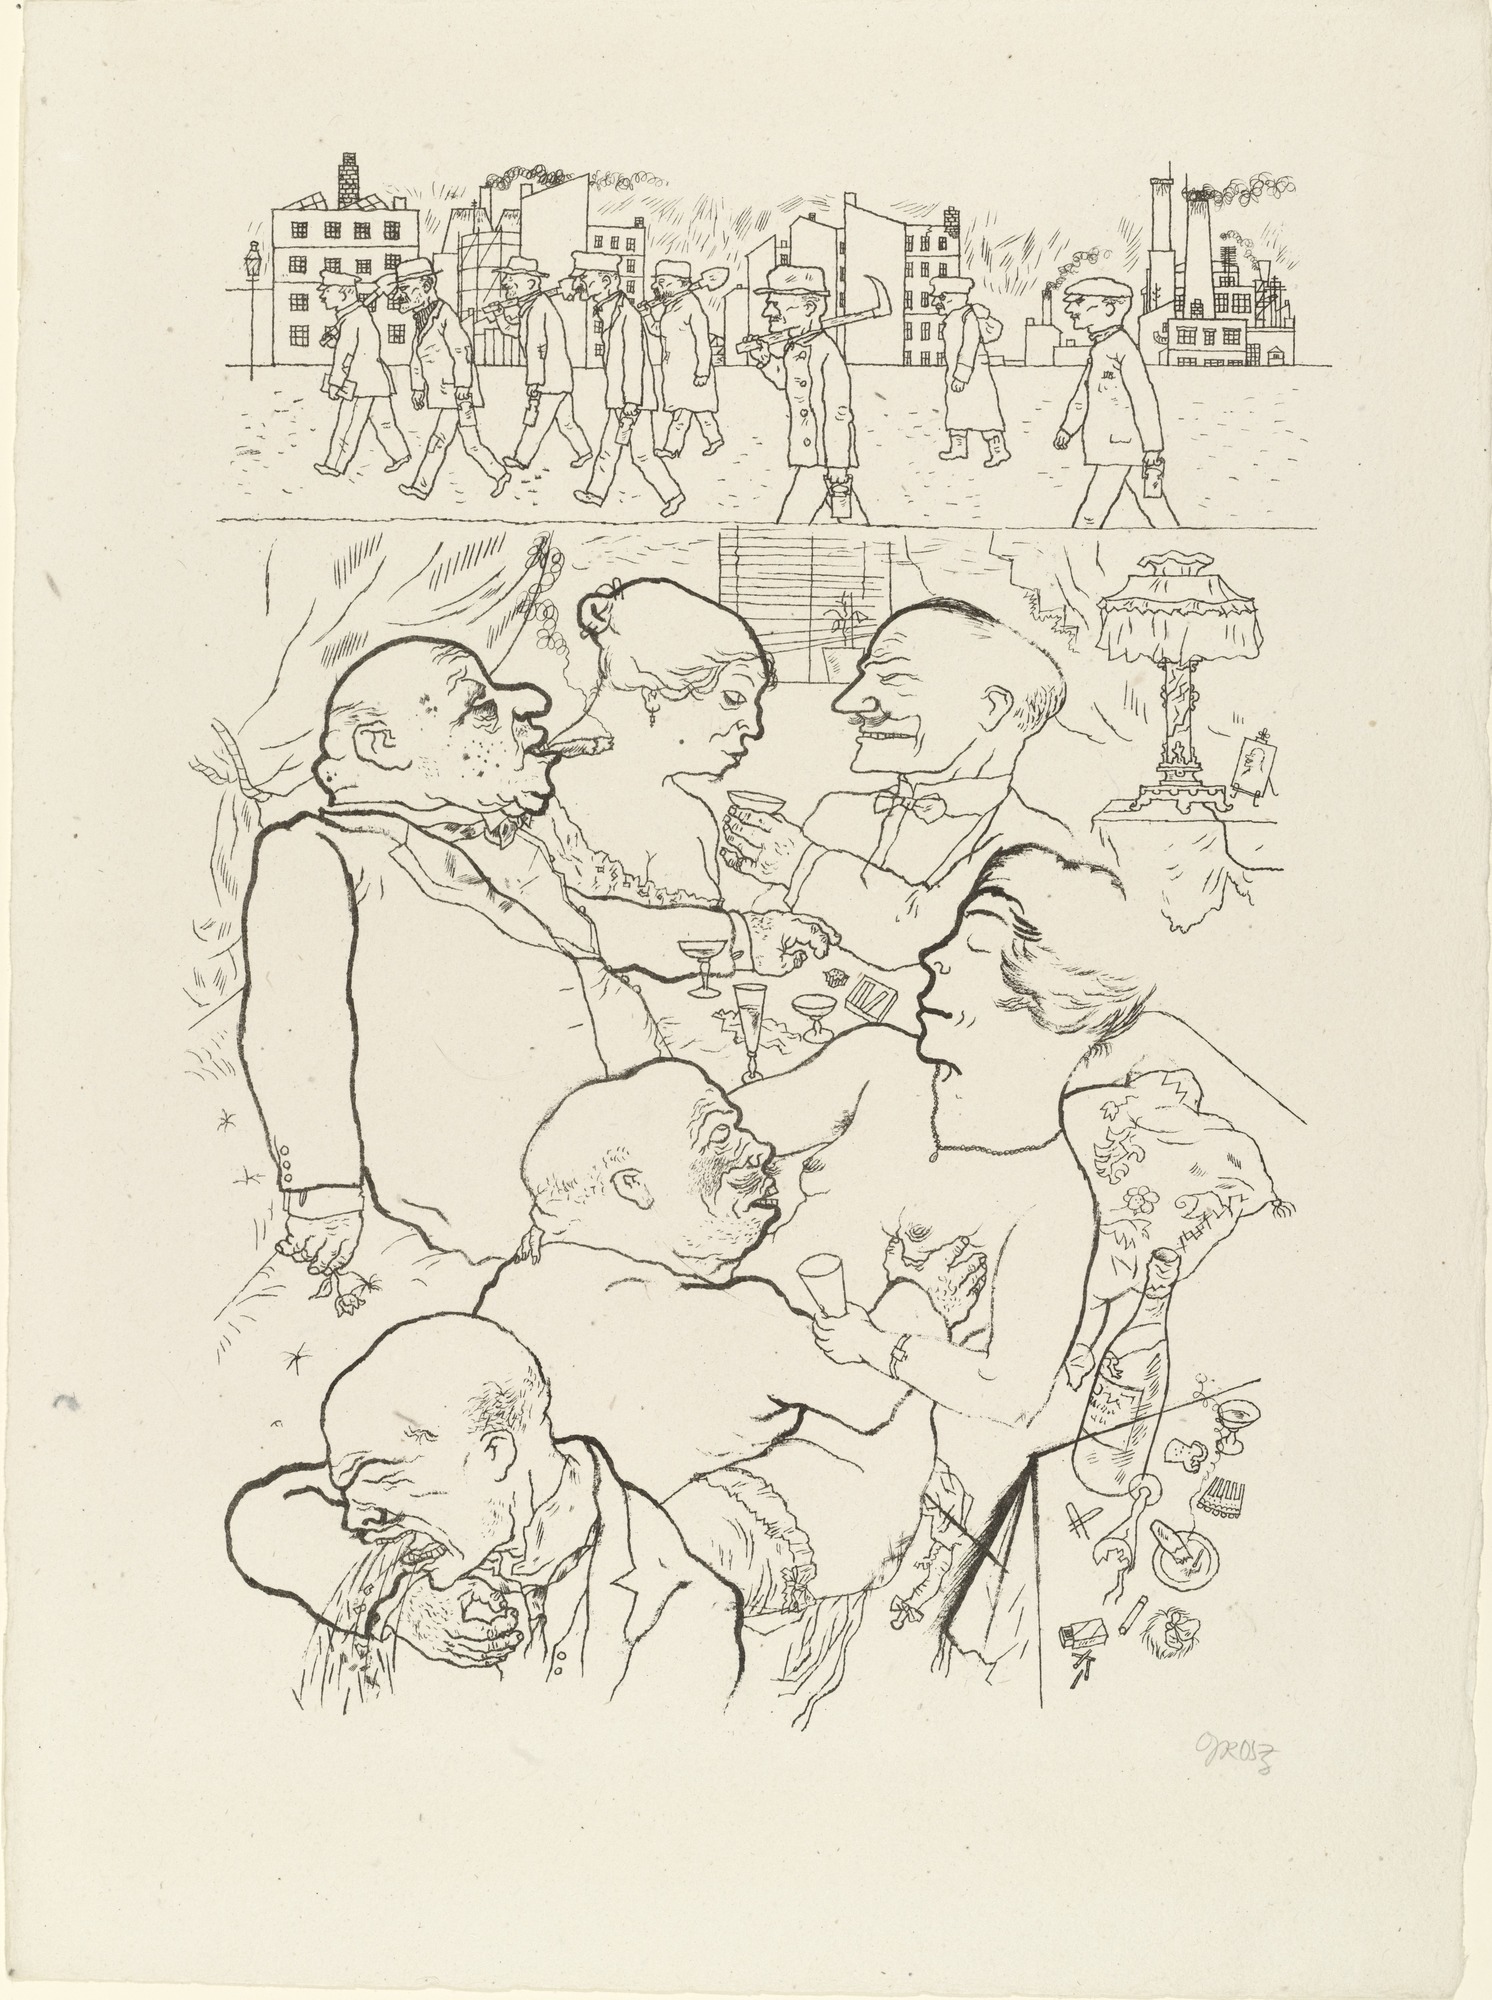 George Grosz, Dawn (Früh um 5 Uhr!), 1920/21, photolithograph from a portfolio of ten lithographs In the Shadows (1921), 48 x 35.4 cm (MoMA)